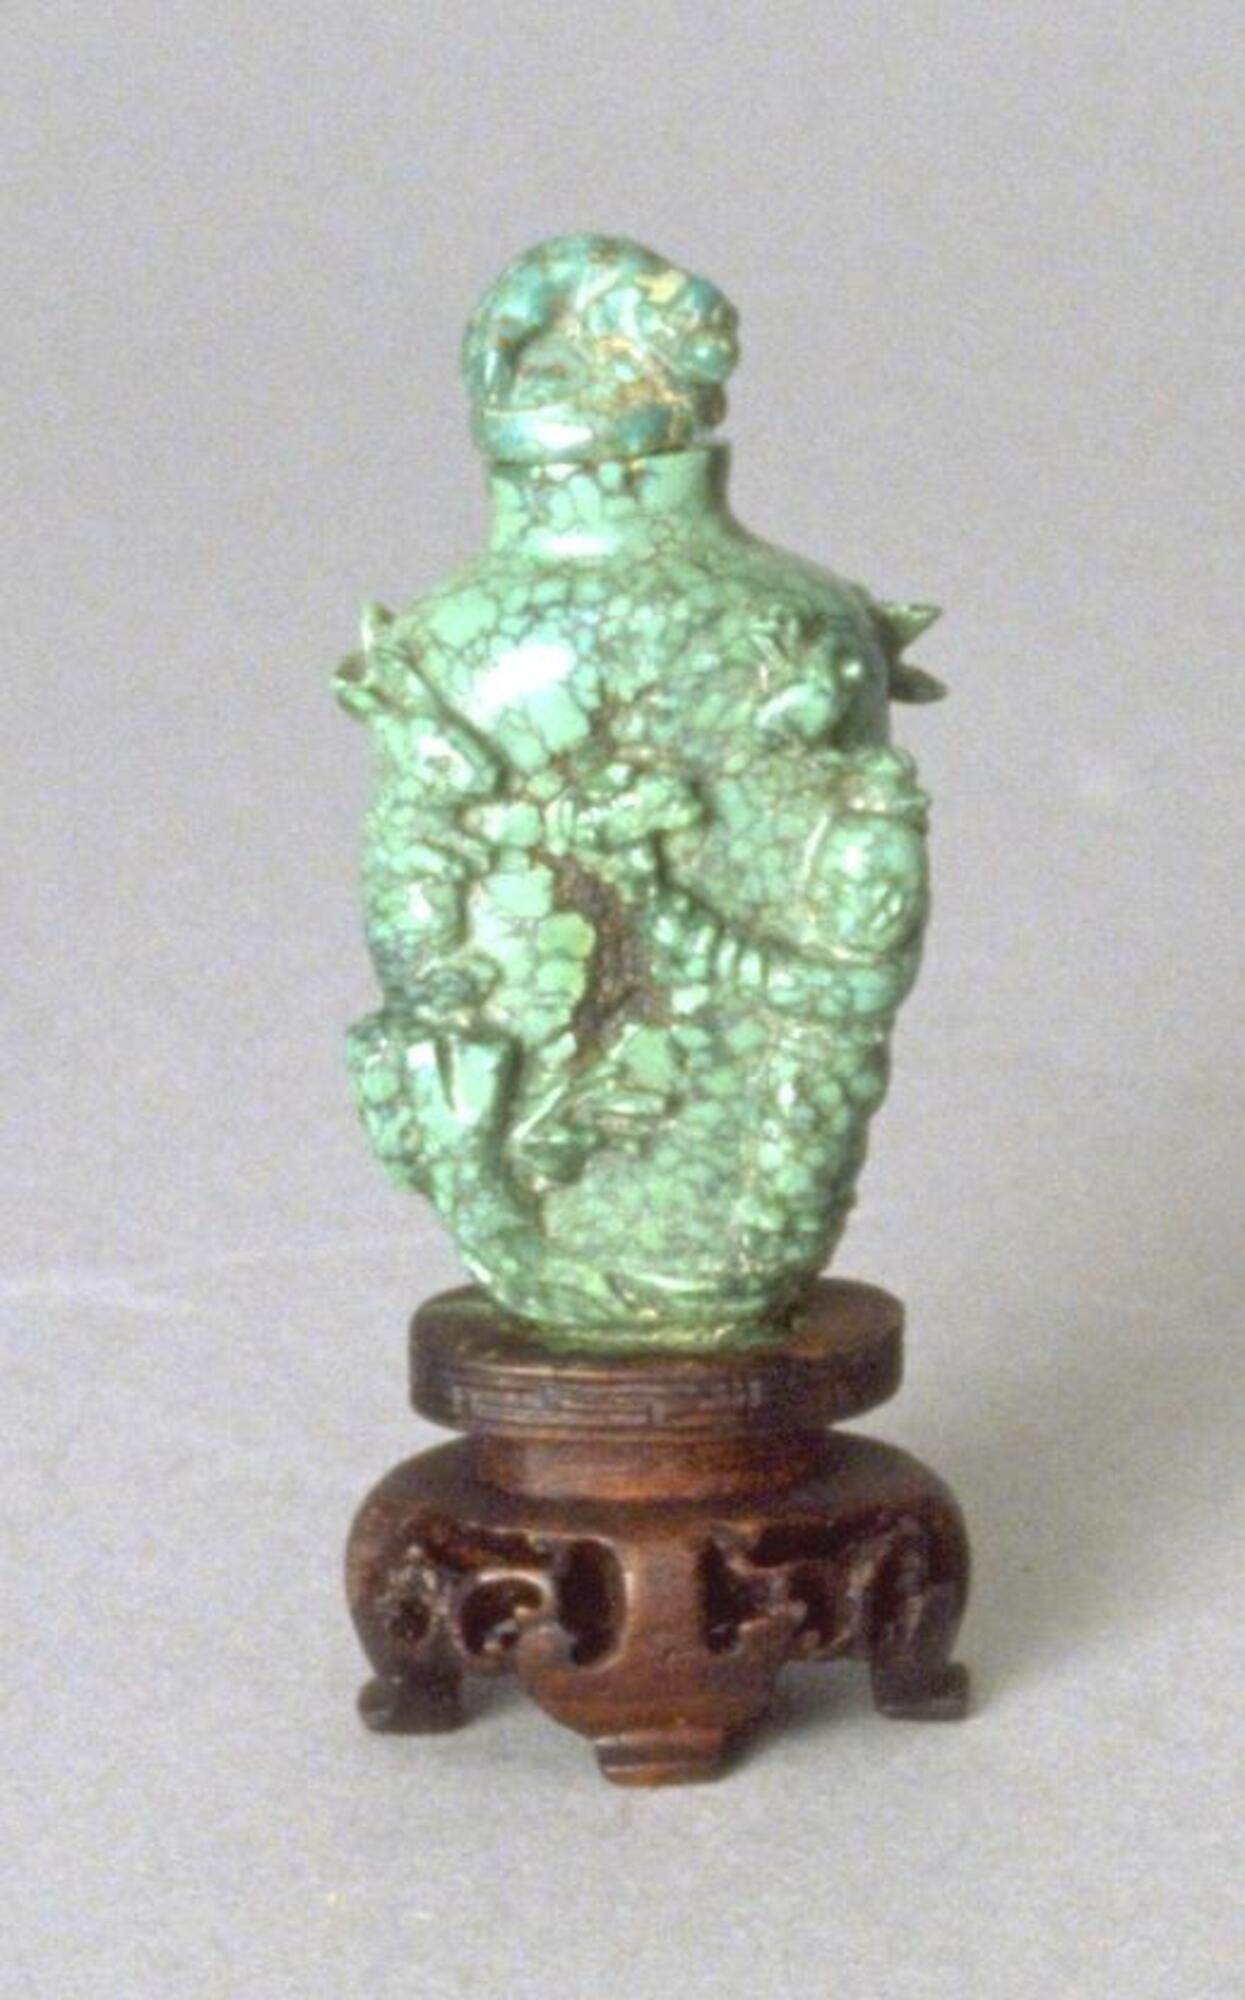 A crackle turquoise snuff bottle in the shape of a vase. Carved in high relief on the surface of the snuff bottle are rabbits and people. On the top of the snuff bottle is a crackle turquoise stopper. The snuff bottle is sitting on an incised wooden stand.